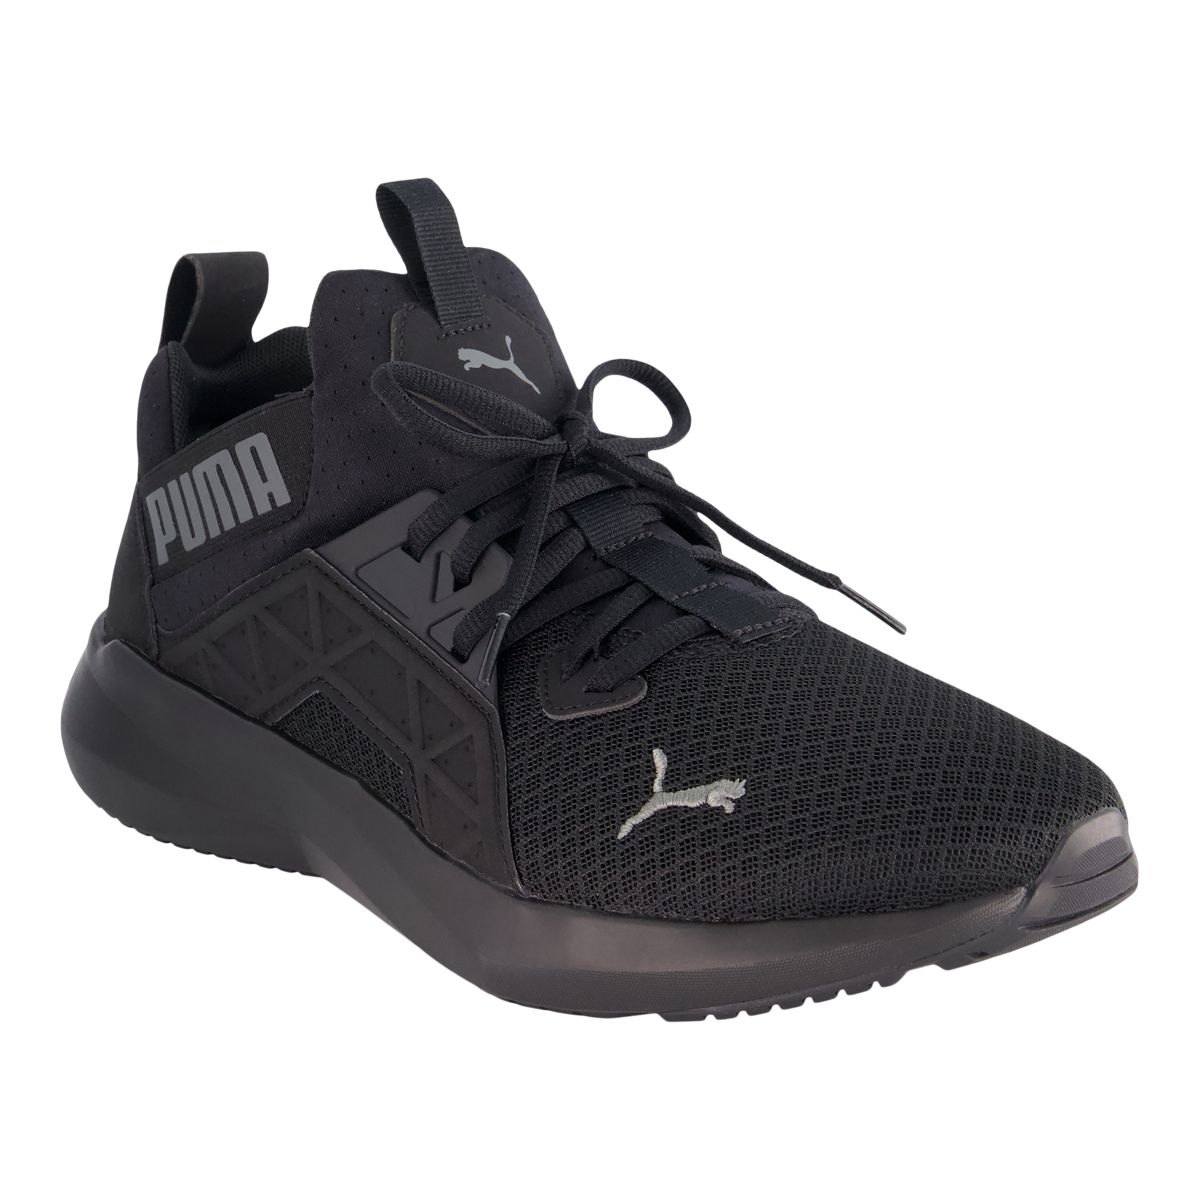 PUMA Men's Softrider Enzo NXT Shoes, Sneakers, Walking, Cushioned ...